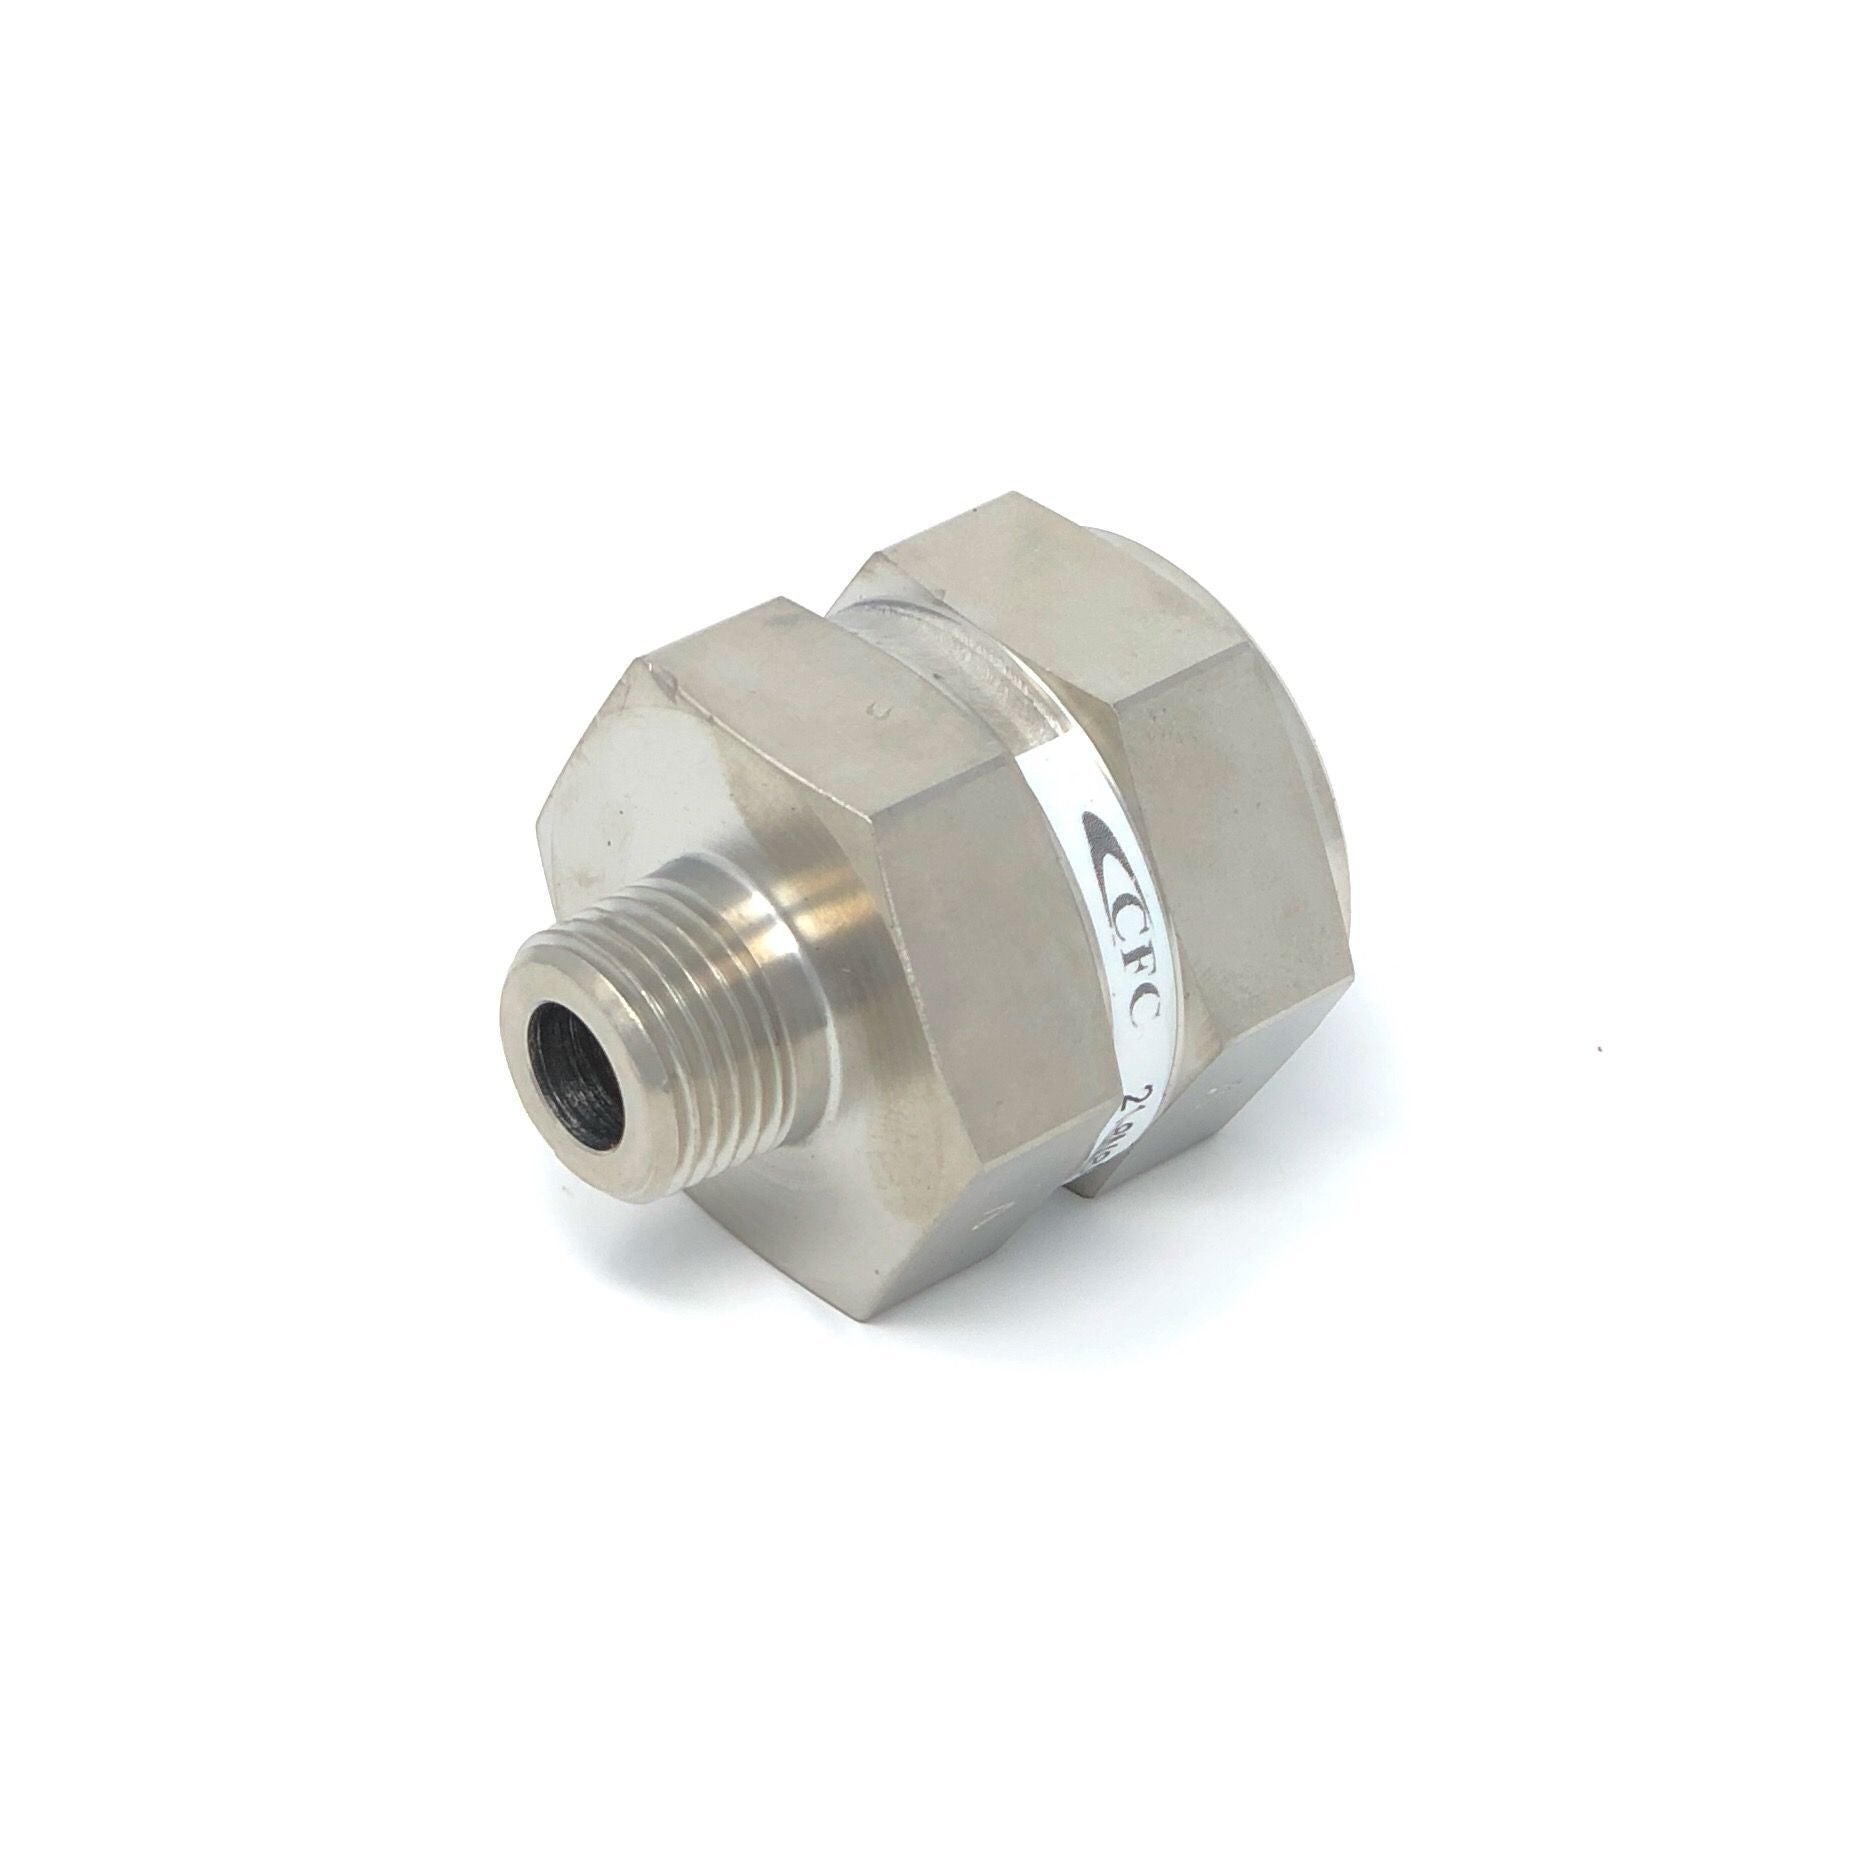 21-4N4N-25S : Chase High Pressure Inline Filter, 6000psi, 1/4" NPT, 25 Micron, No Visual Indicator, No Bypass